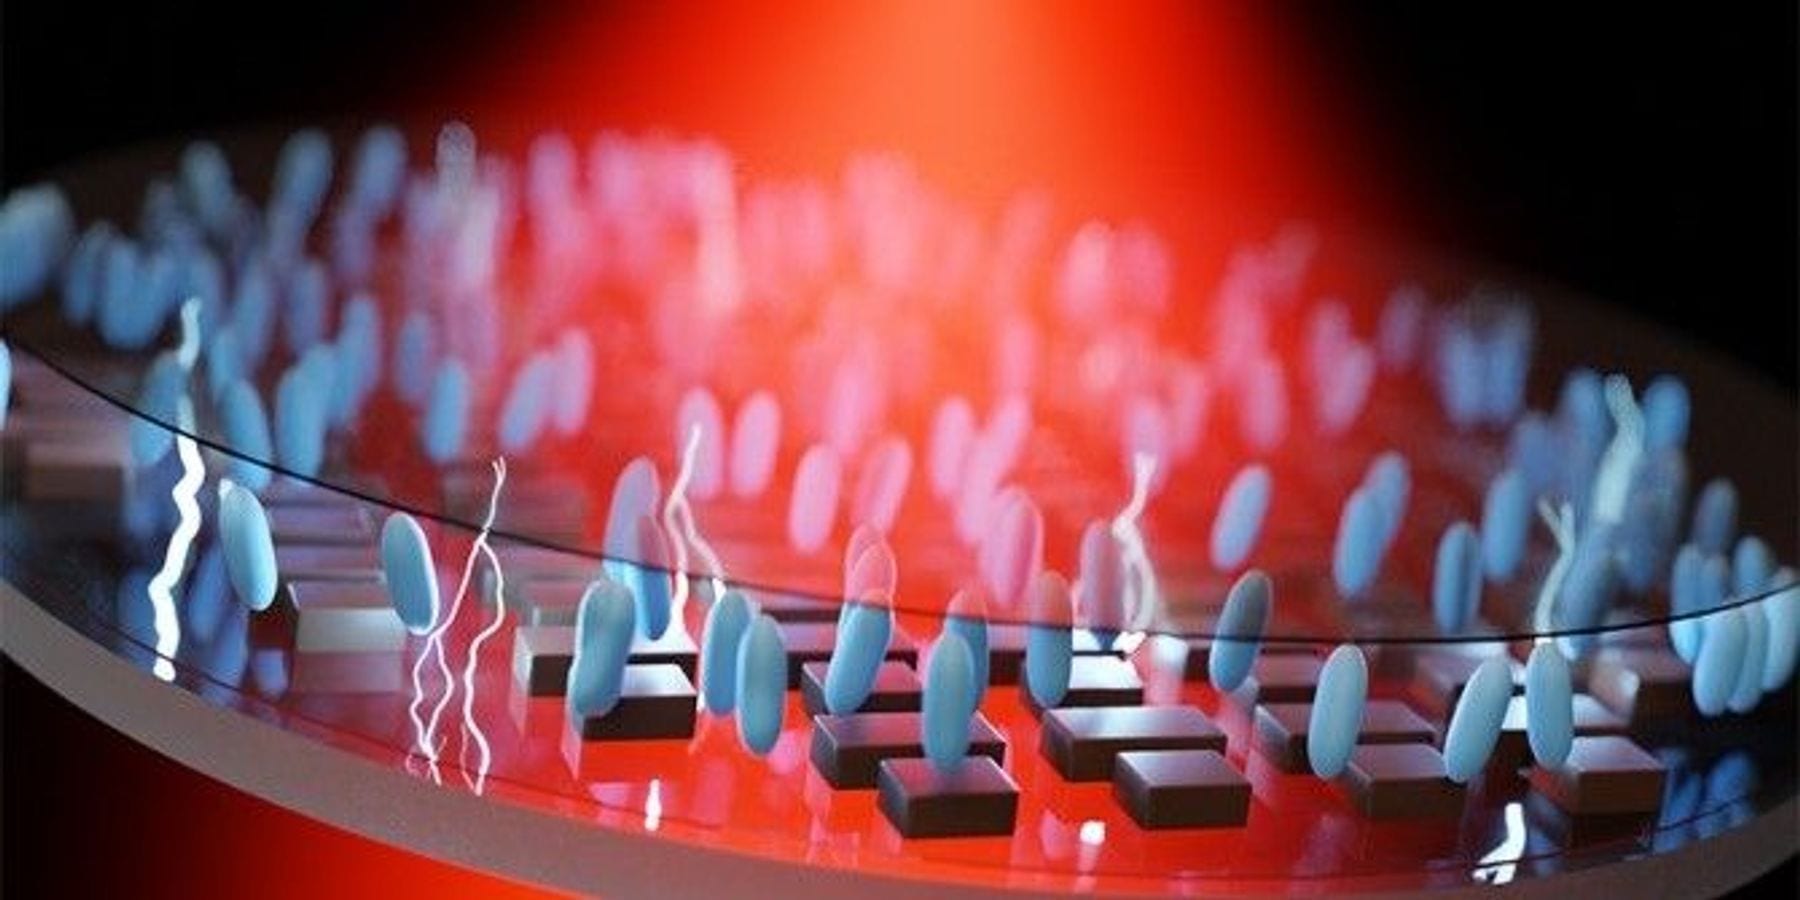 Credit: Daniil Shilkin
Conceptual rendering of an ultrathin, electrically tunable metalens developed by Cornell and Samsung engineers.